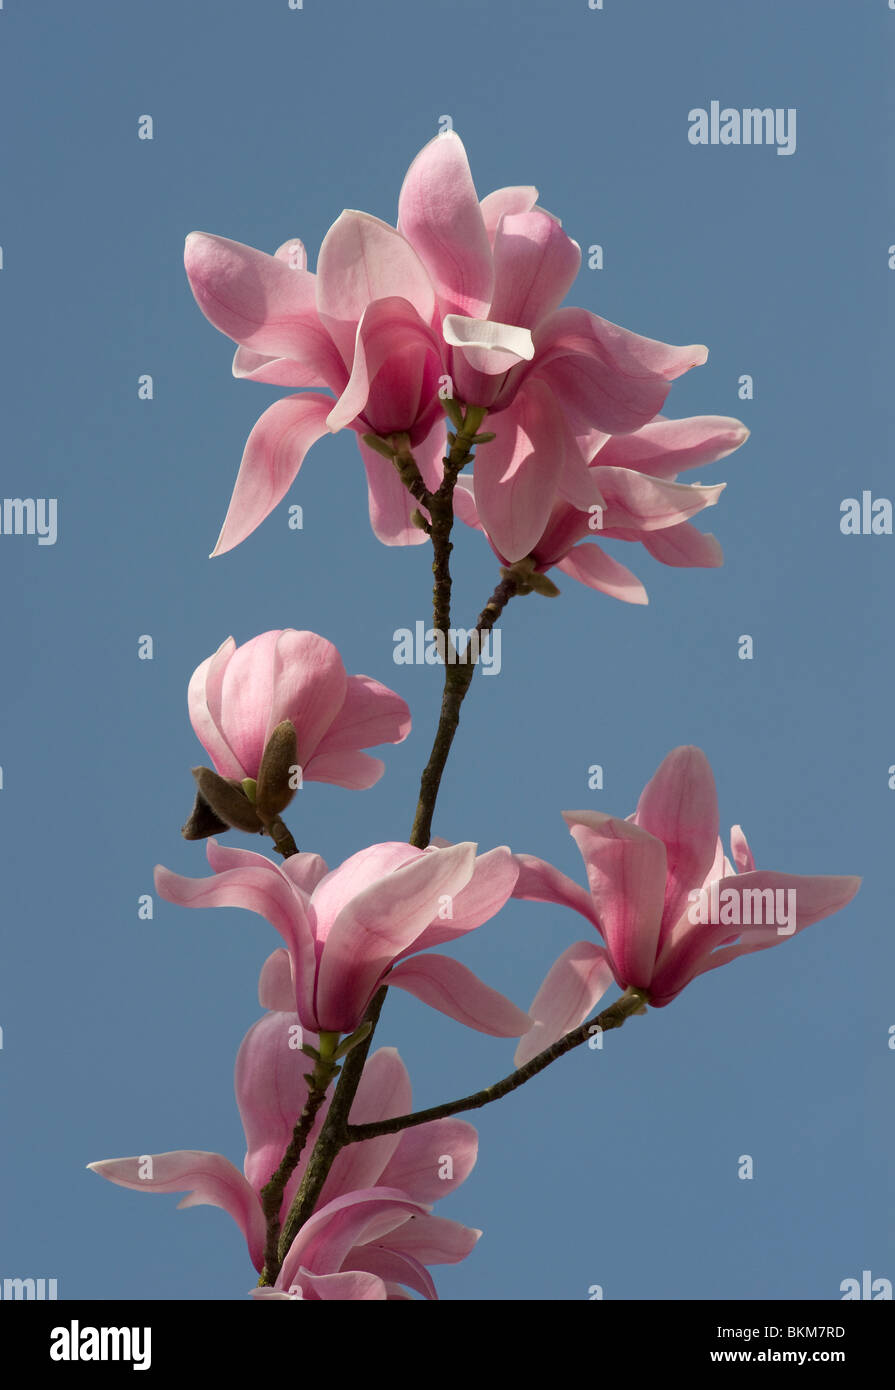 Sprengers magnolia, Magnolia sprengeri, grows in forests or thickets at 1300-2400 m in China. Stock Photo